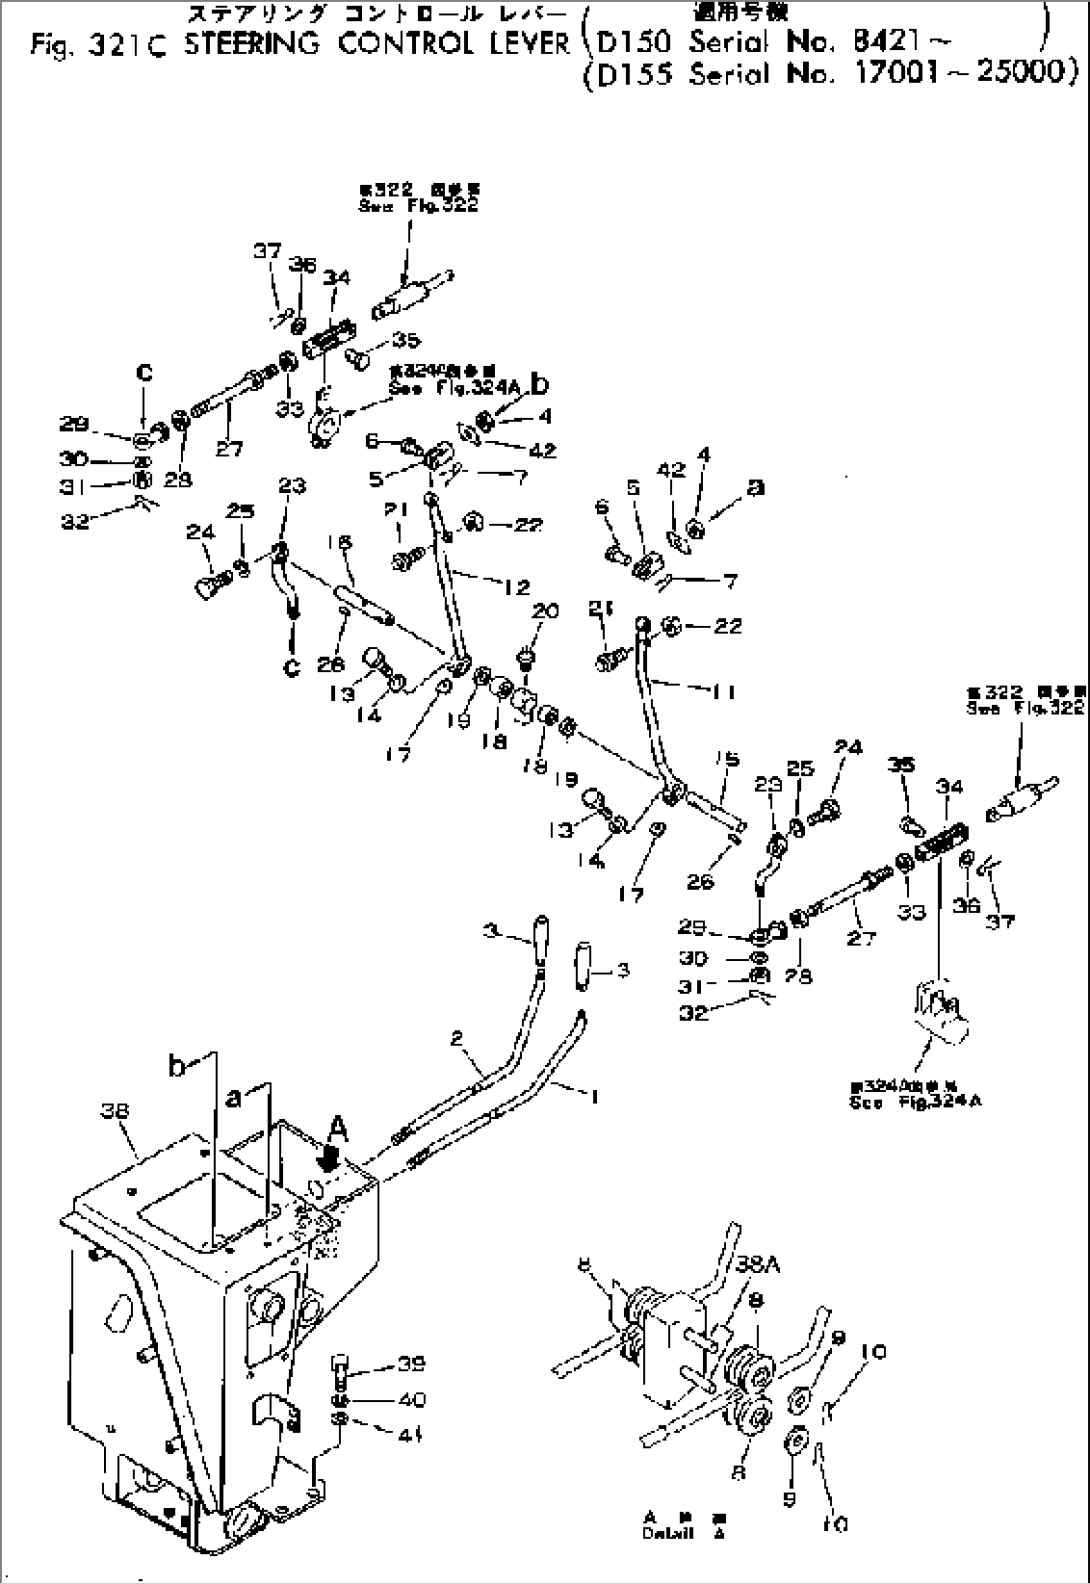 STEERING CONTROL LEVER(#8421-)